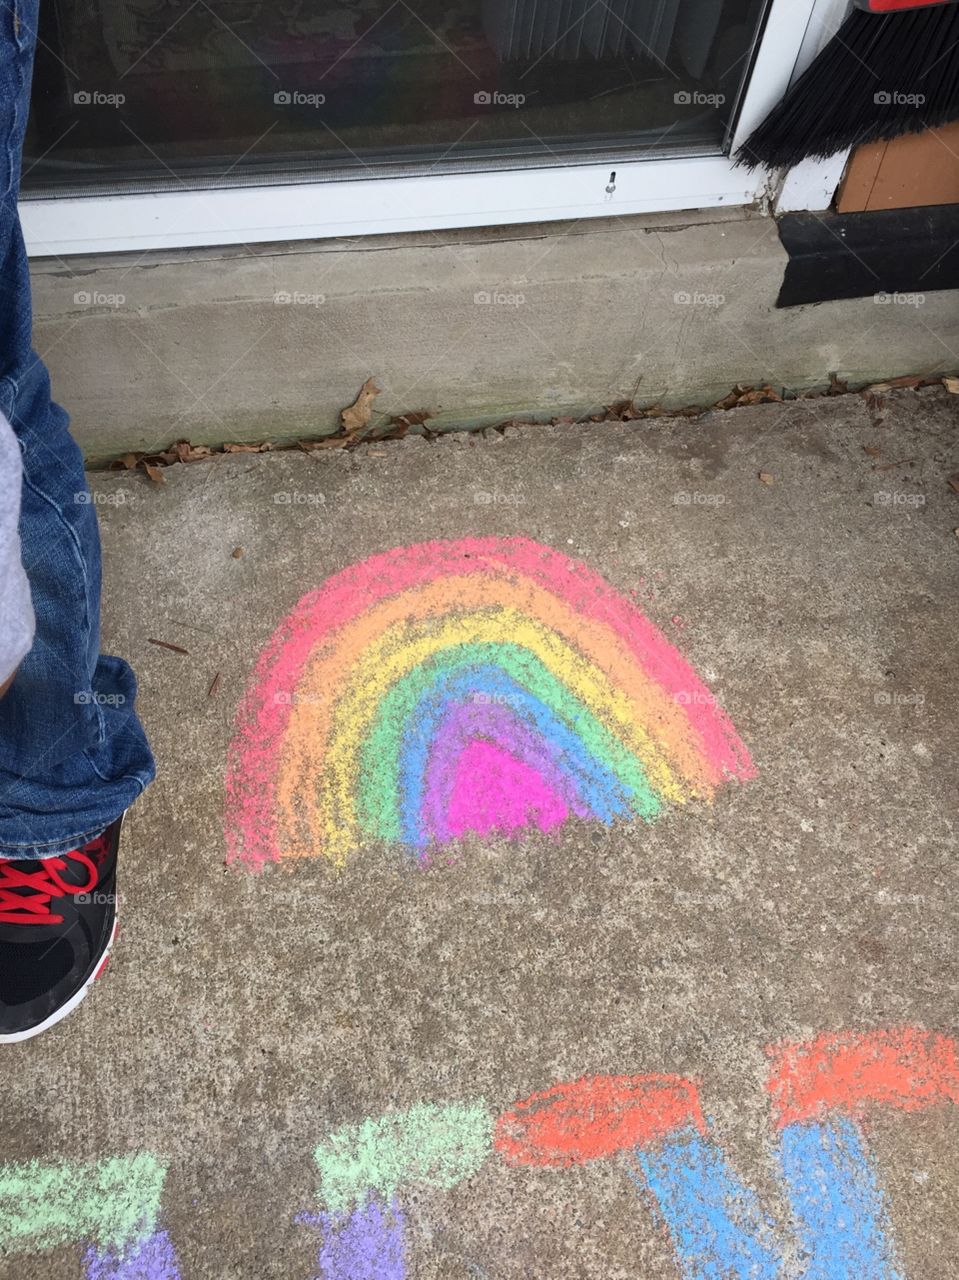 Chalk drawing of a rainbow outside on the patio